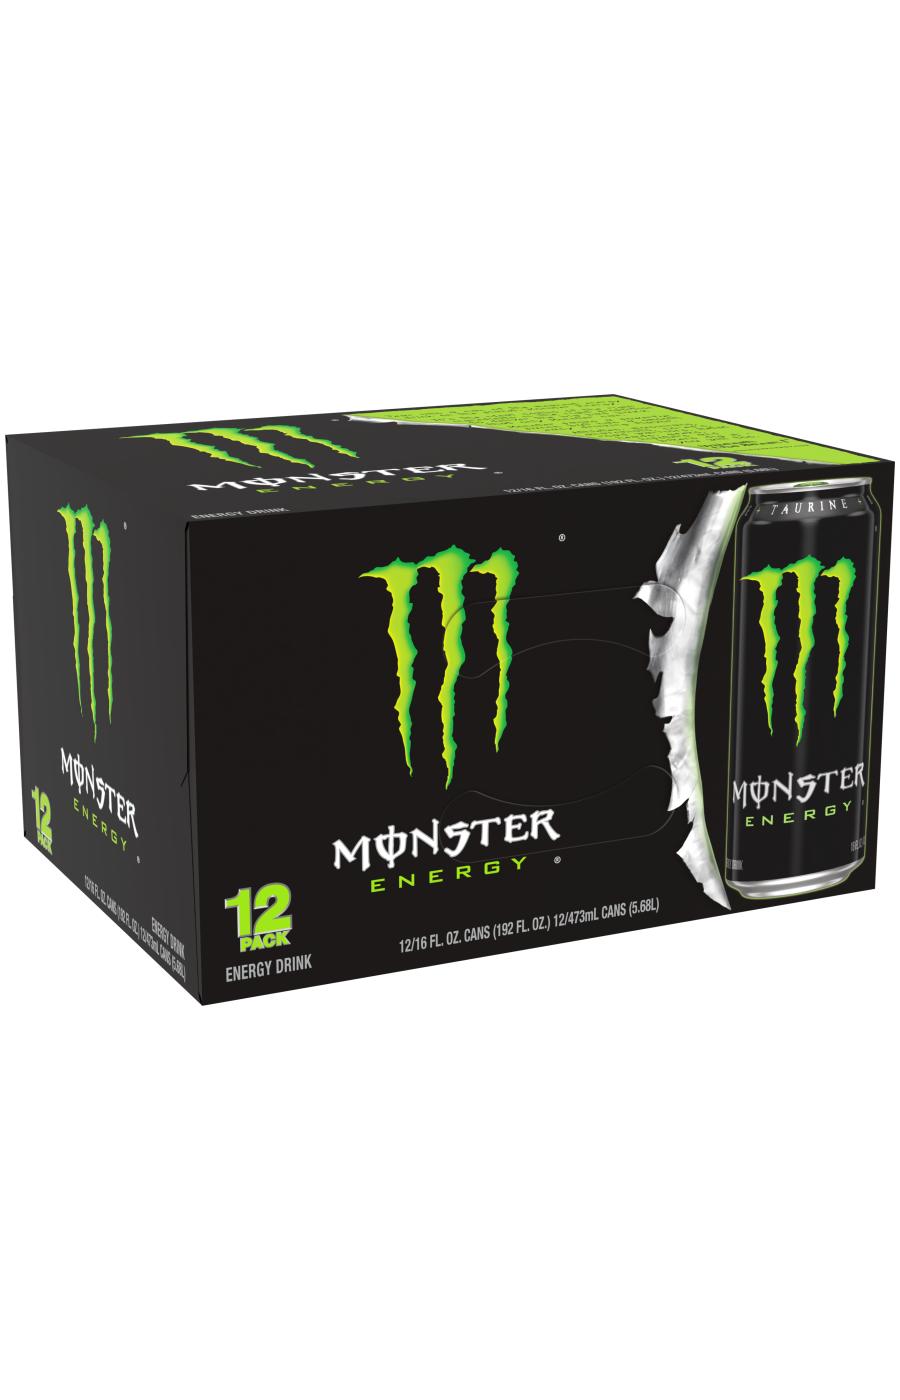 Monster Energy Original Green 16 oz Cans; image 2 of 3